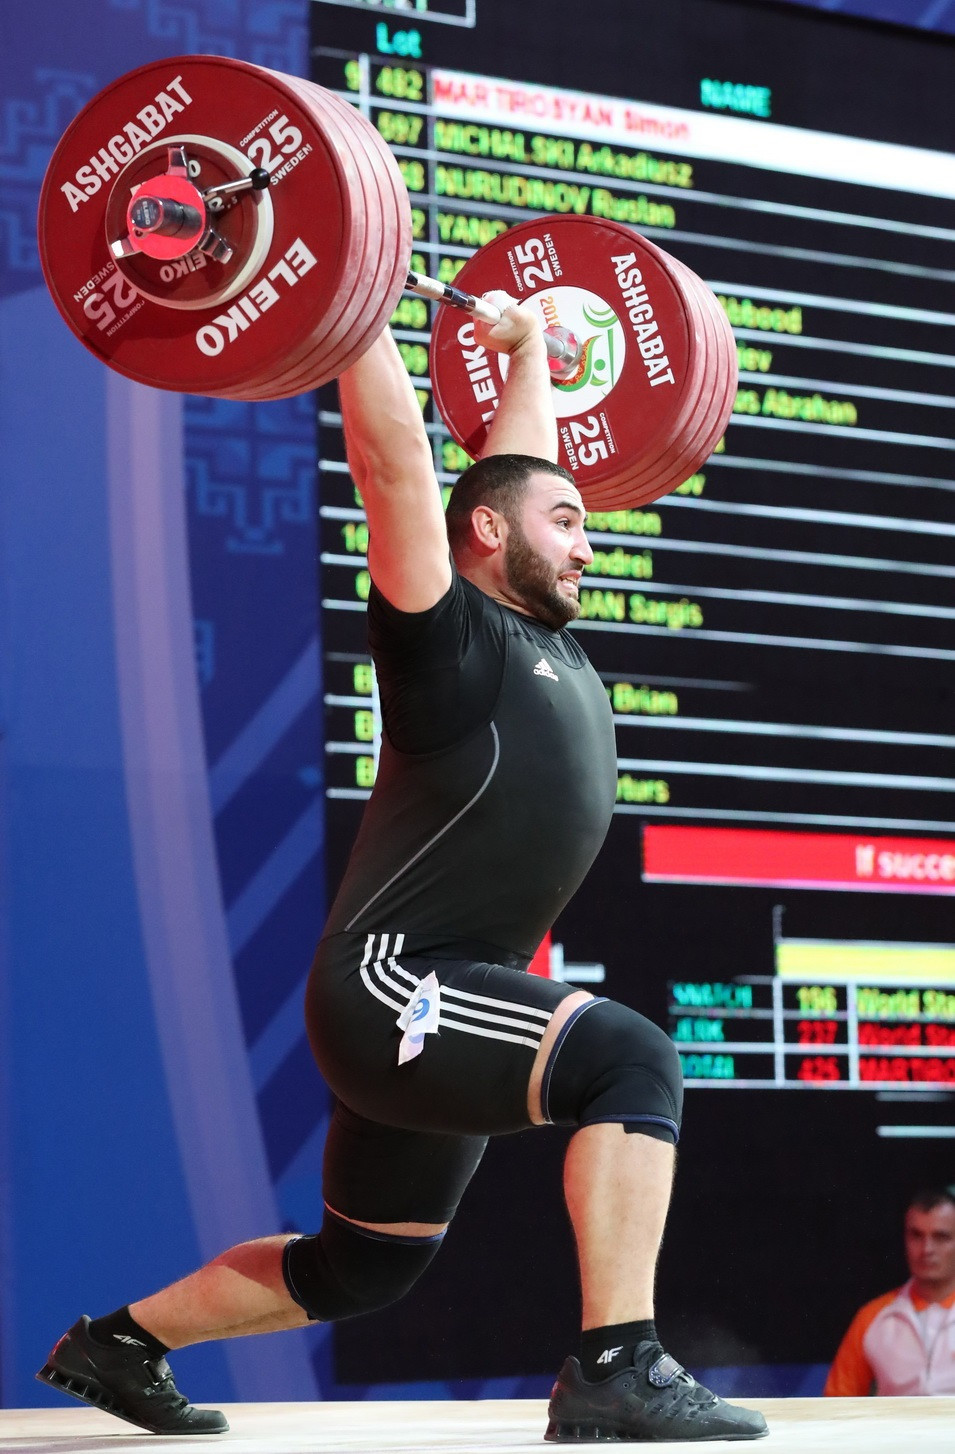 Armenia's Martirosyan claims maiden global crown with men's 109kg triumph at 2018 IWF World Championships